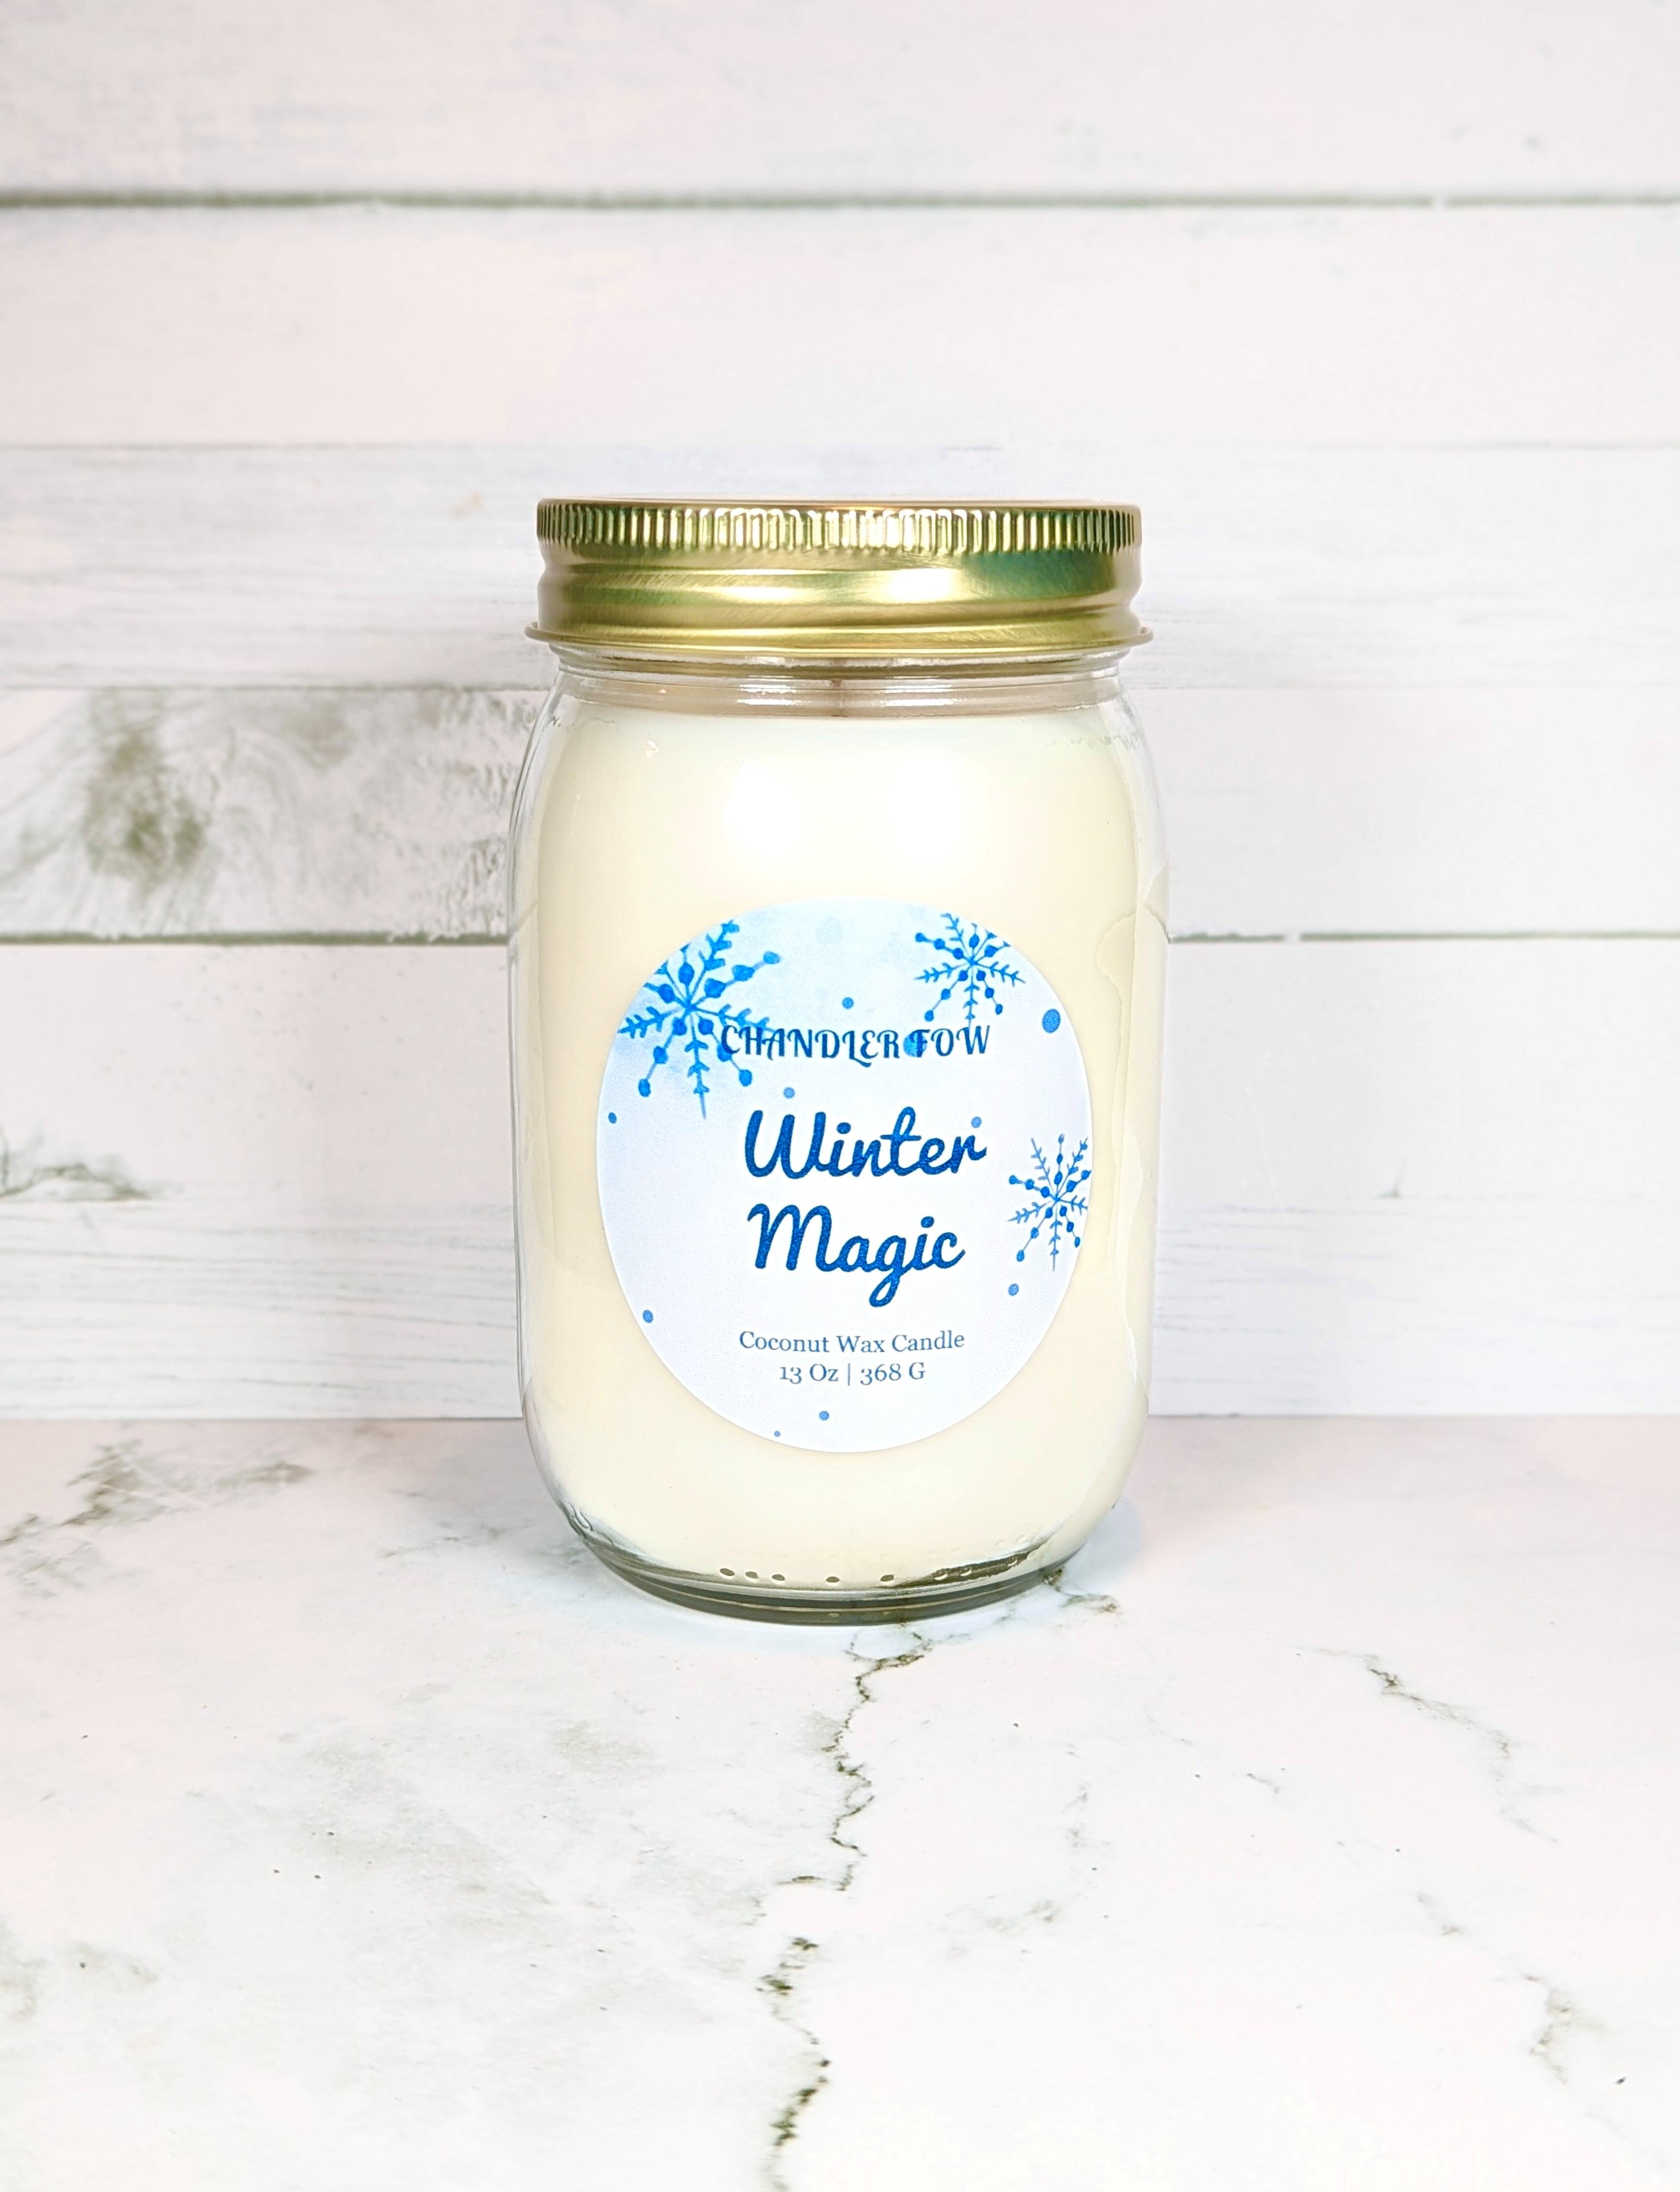 Best Wax For Candles - The Wax Chandler